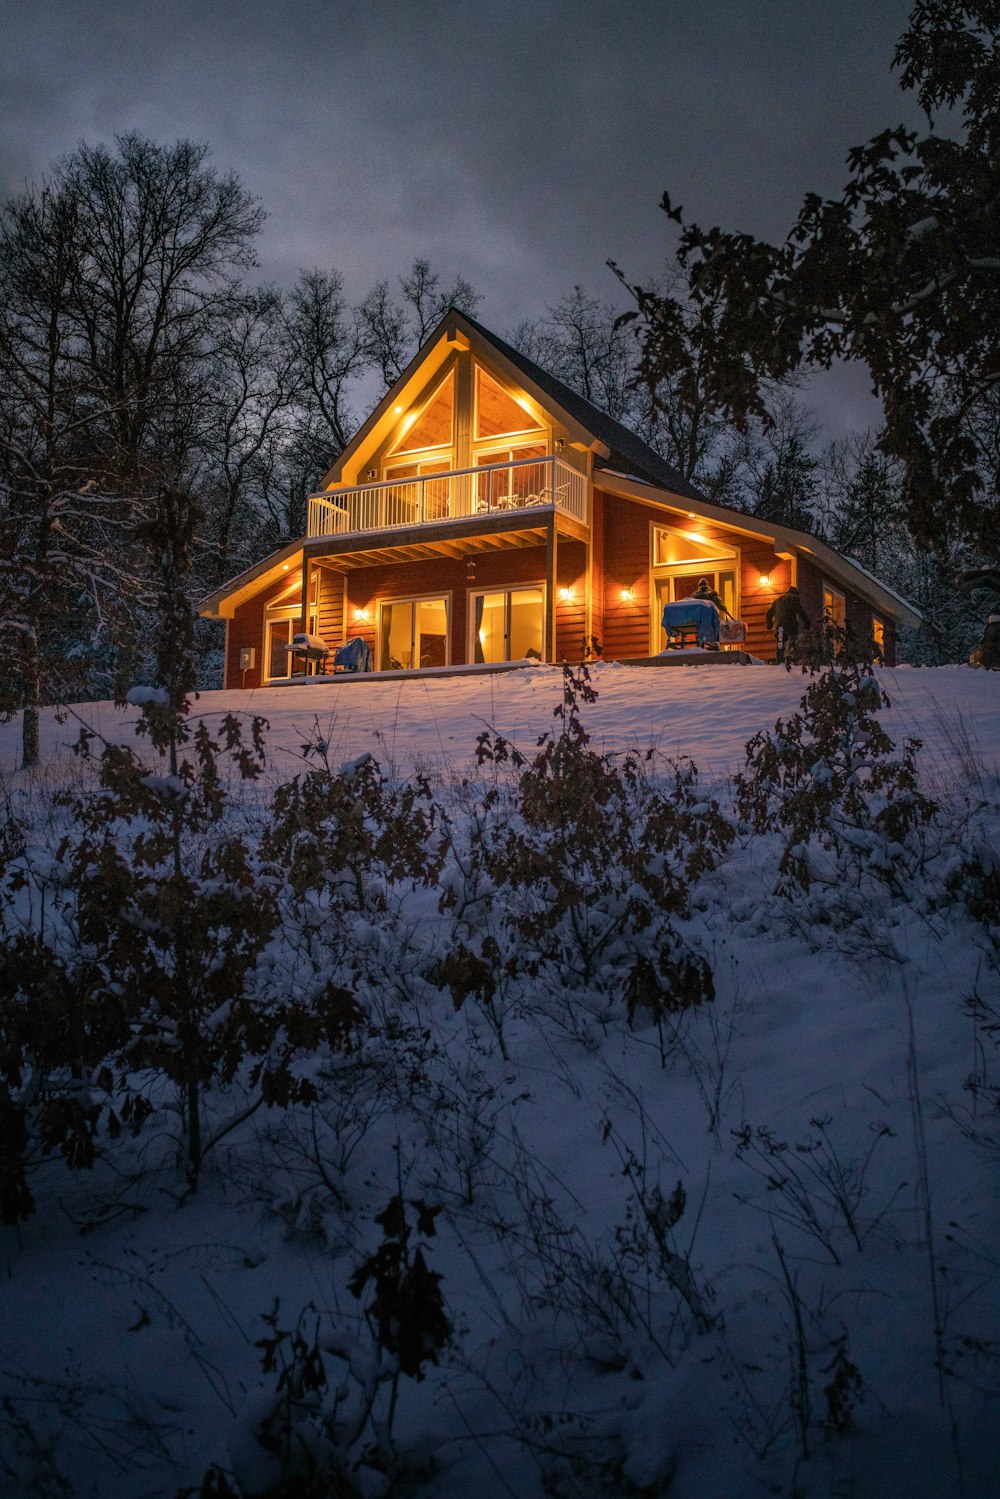 brown wooden house surrounded by trees covered with snow during night time